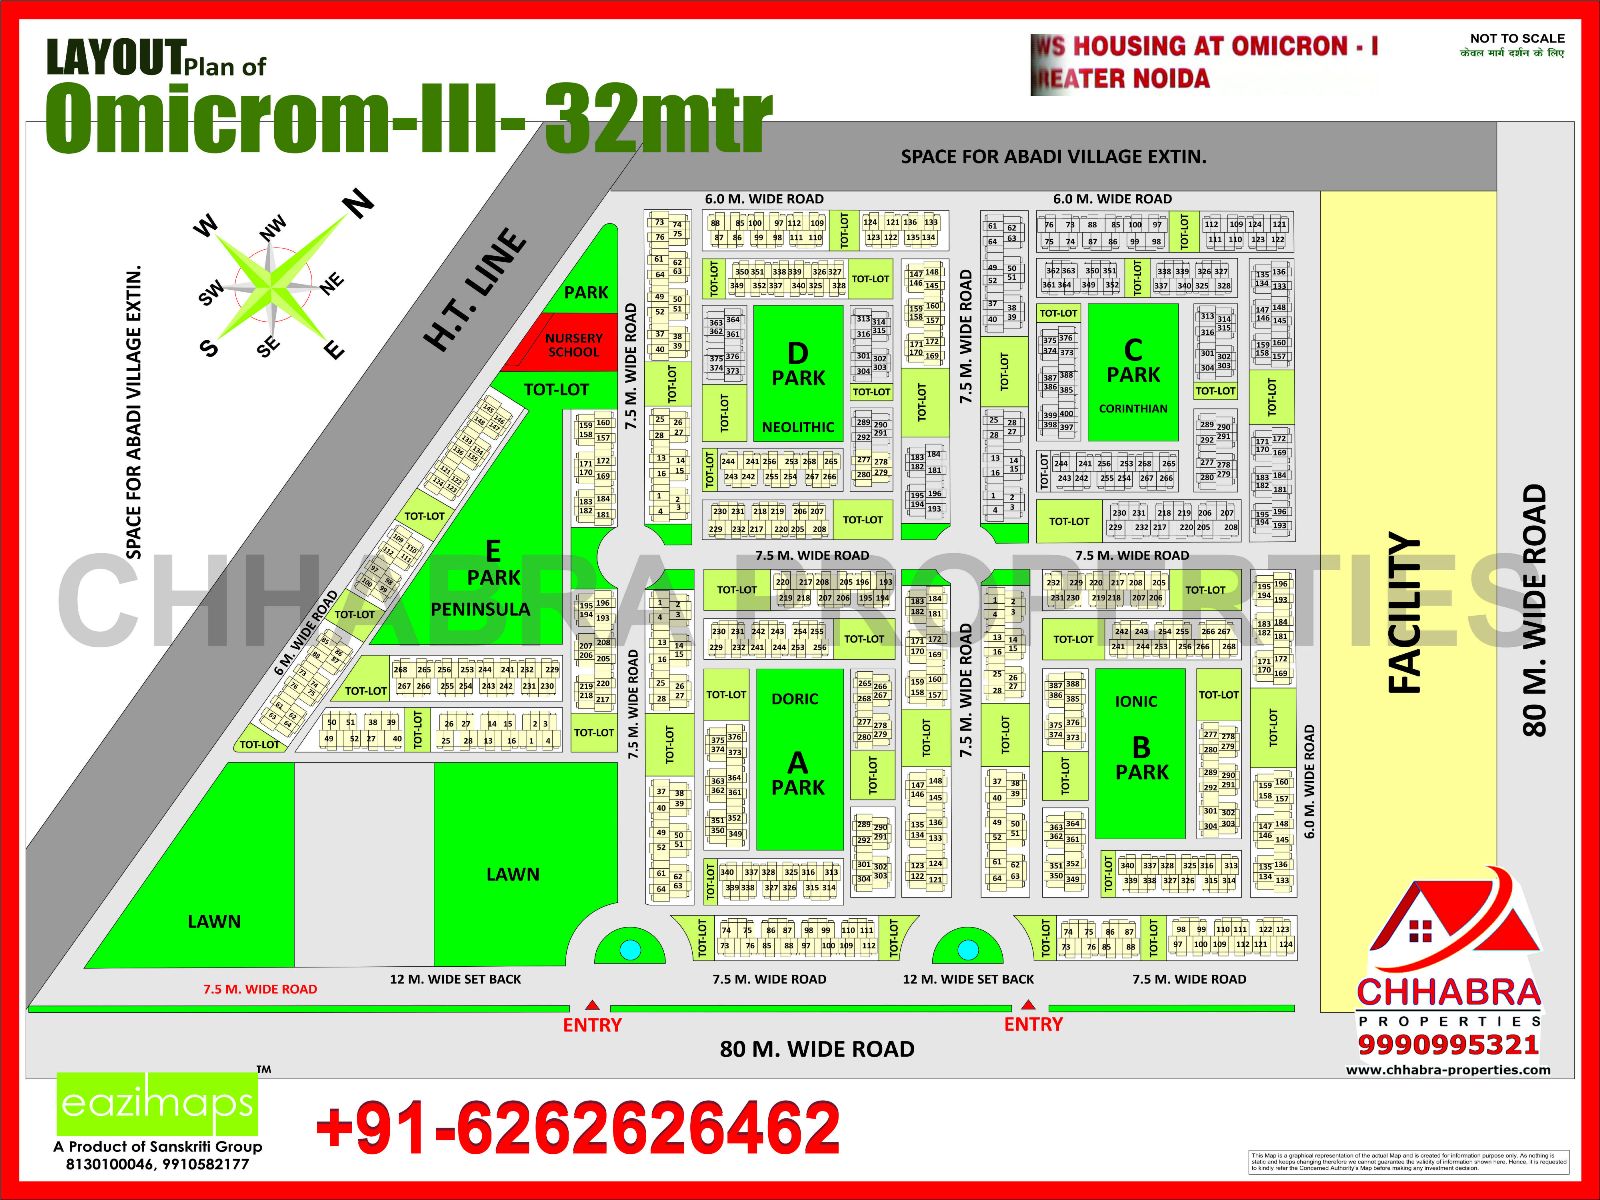 layout plan for omicrom iii 32mtr hd map